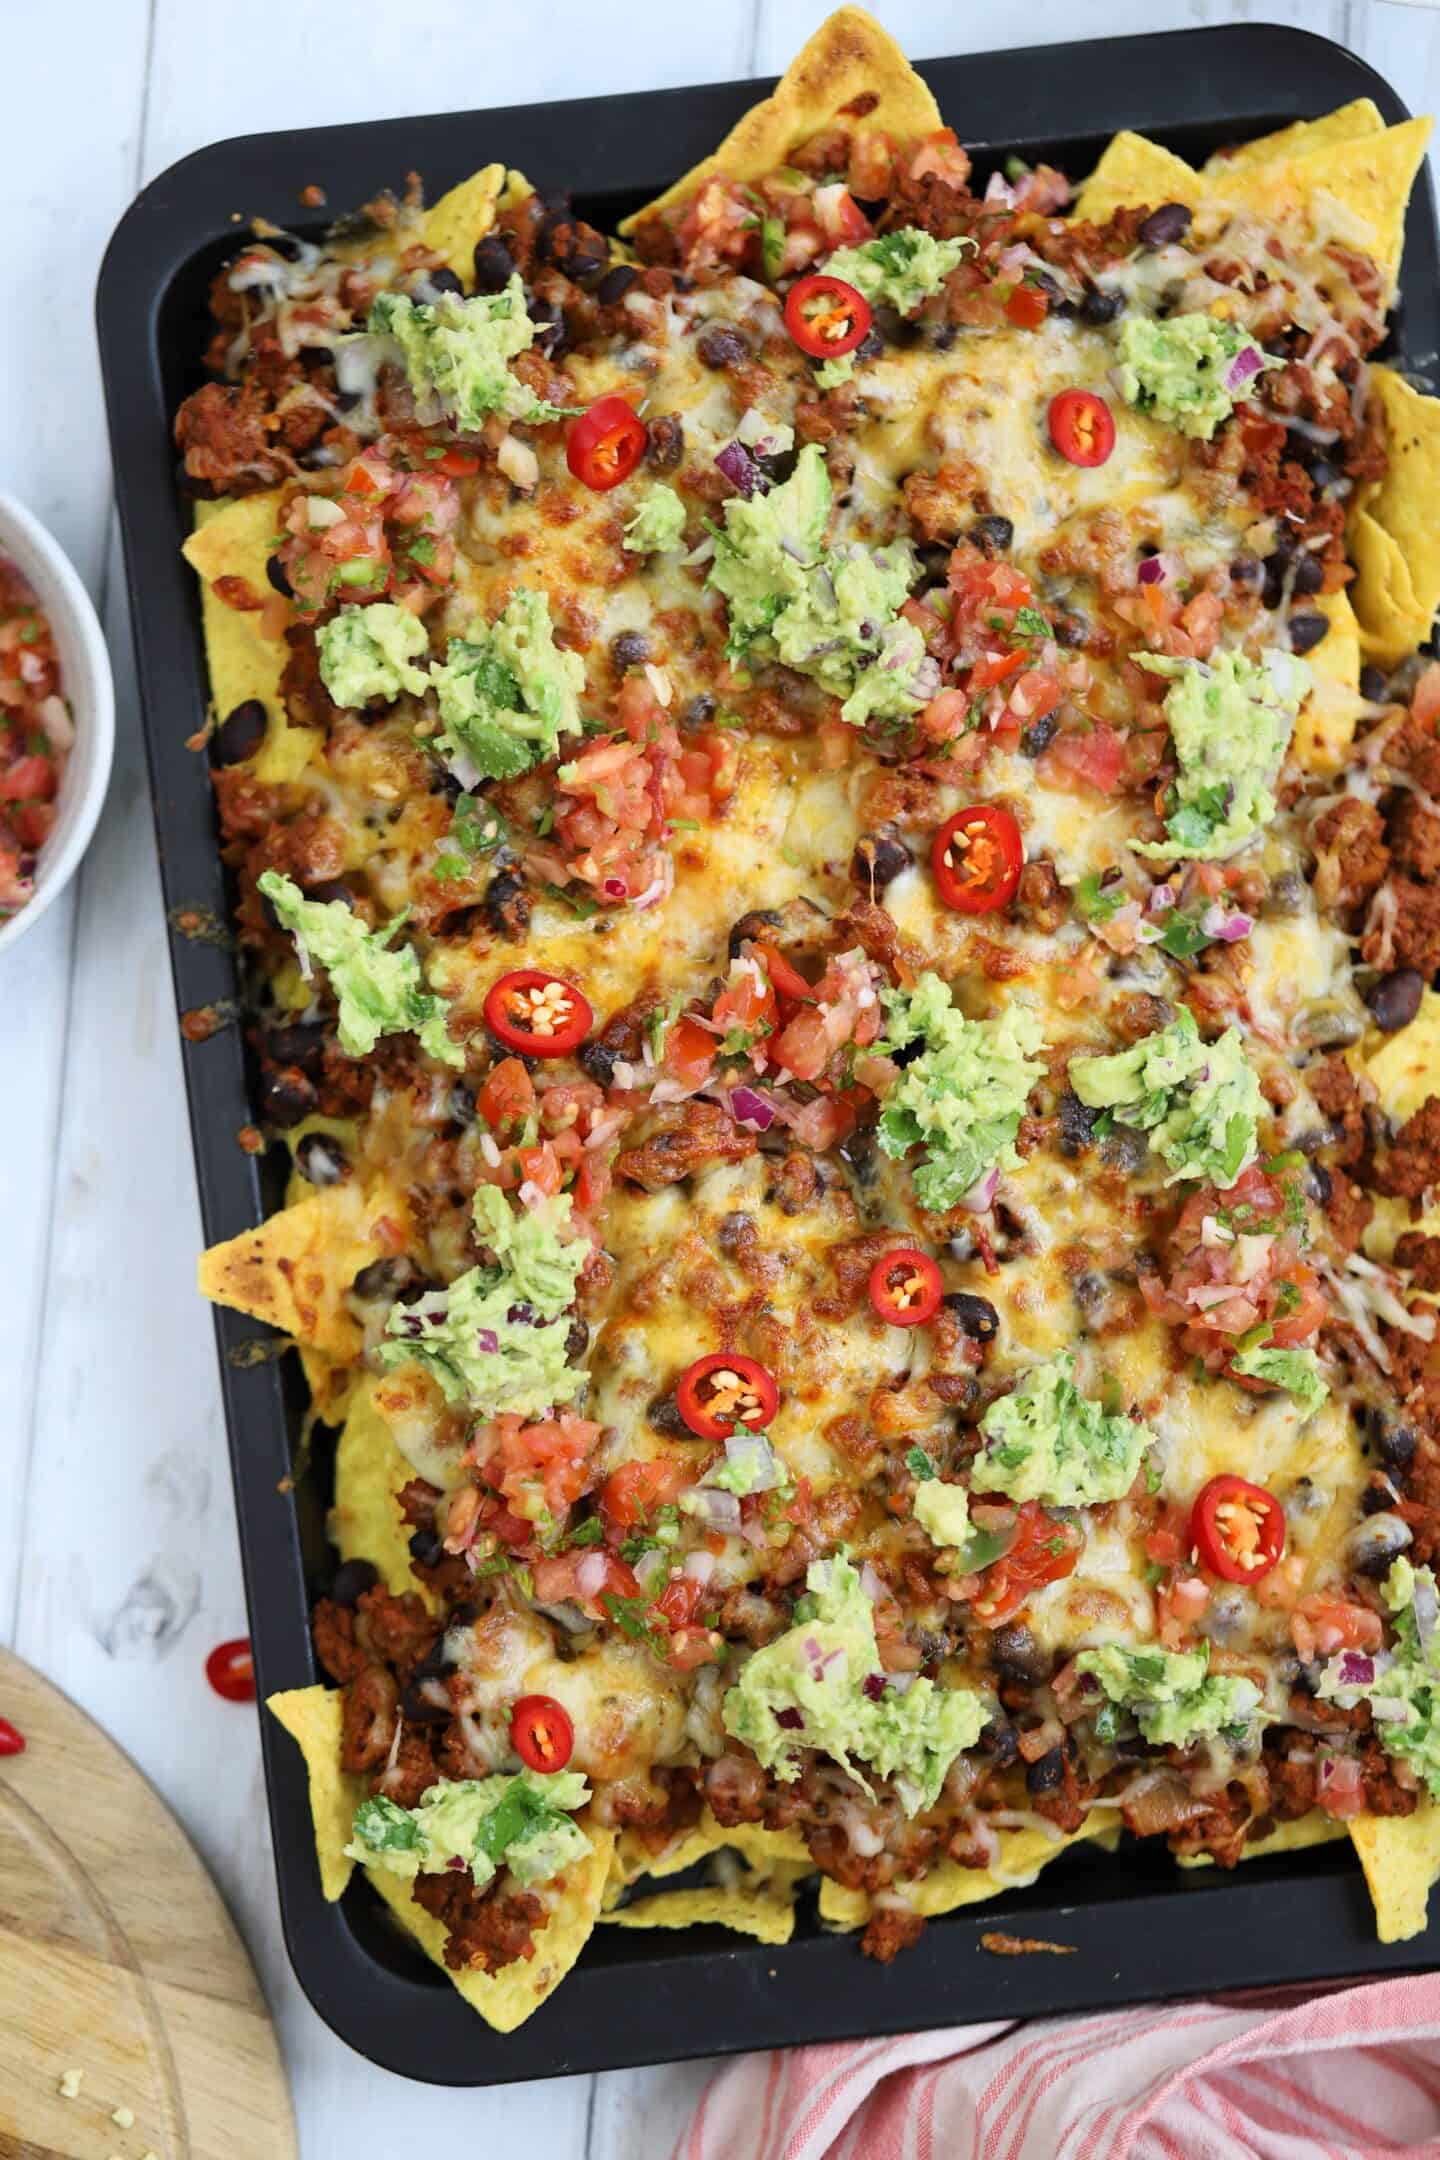 A tray of gluten free nachos with beef, cheese, guacamole and salsa.